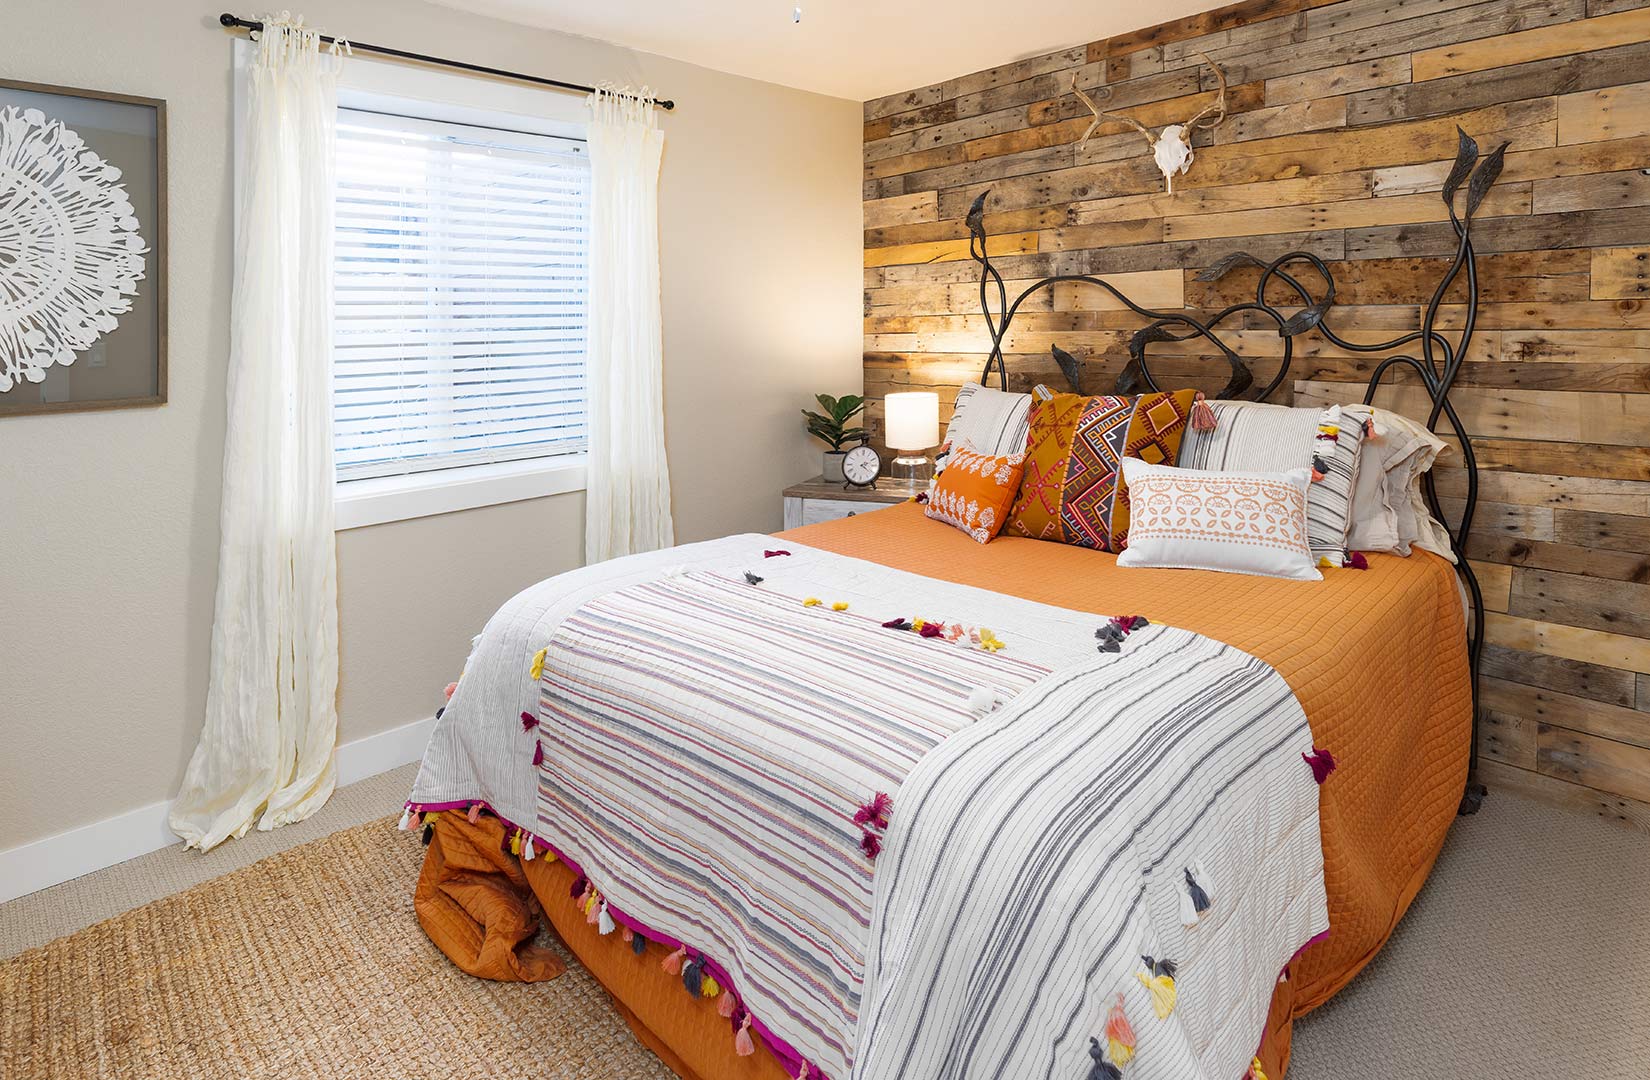 Downstairs bedroom with a barn wood accent wall installed in-house by Freestone Design-Build